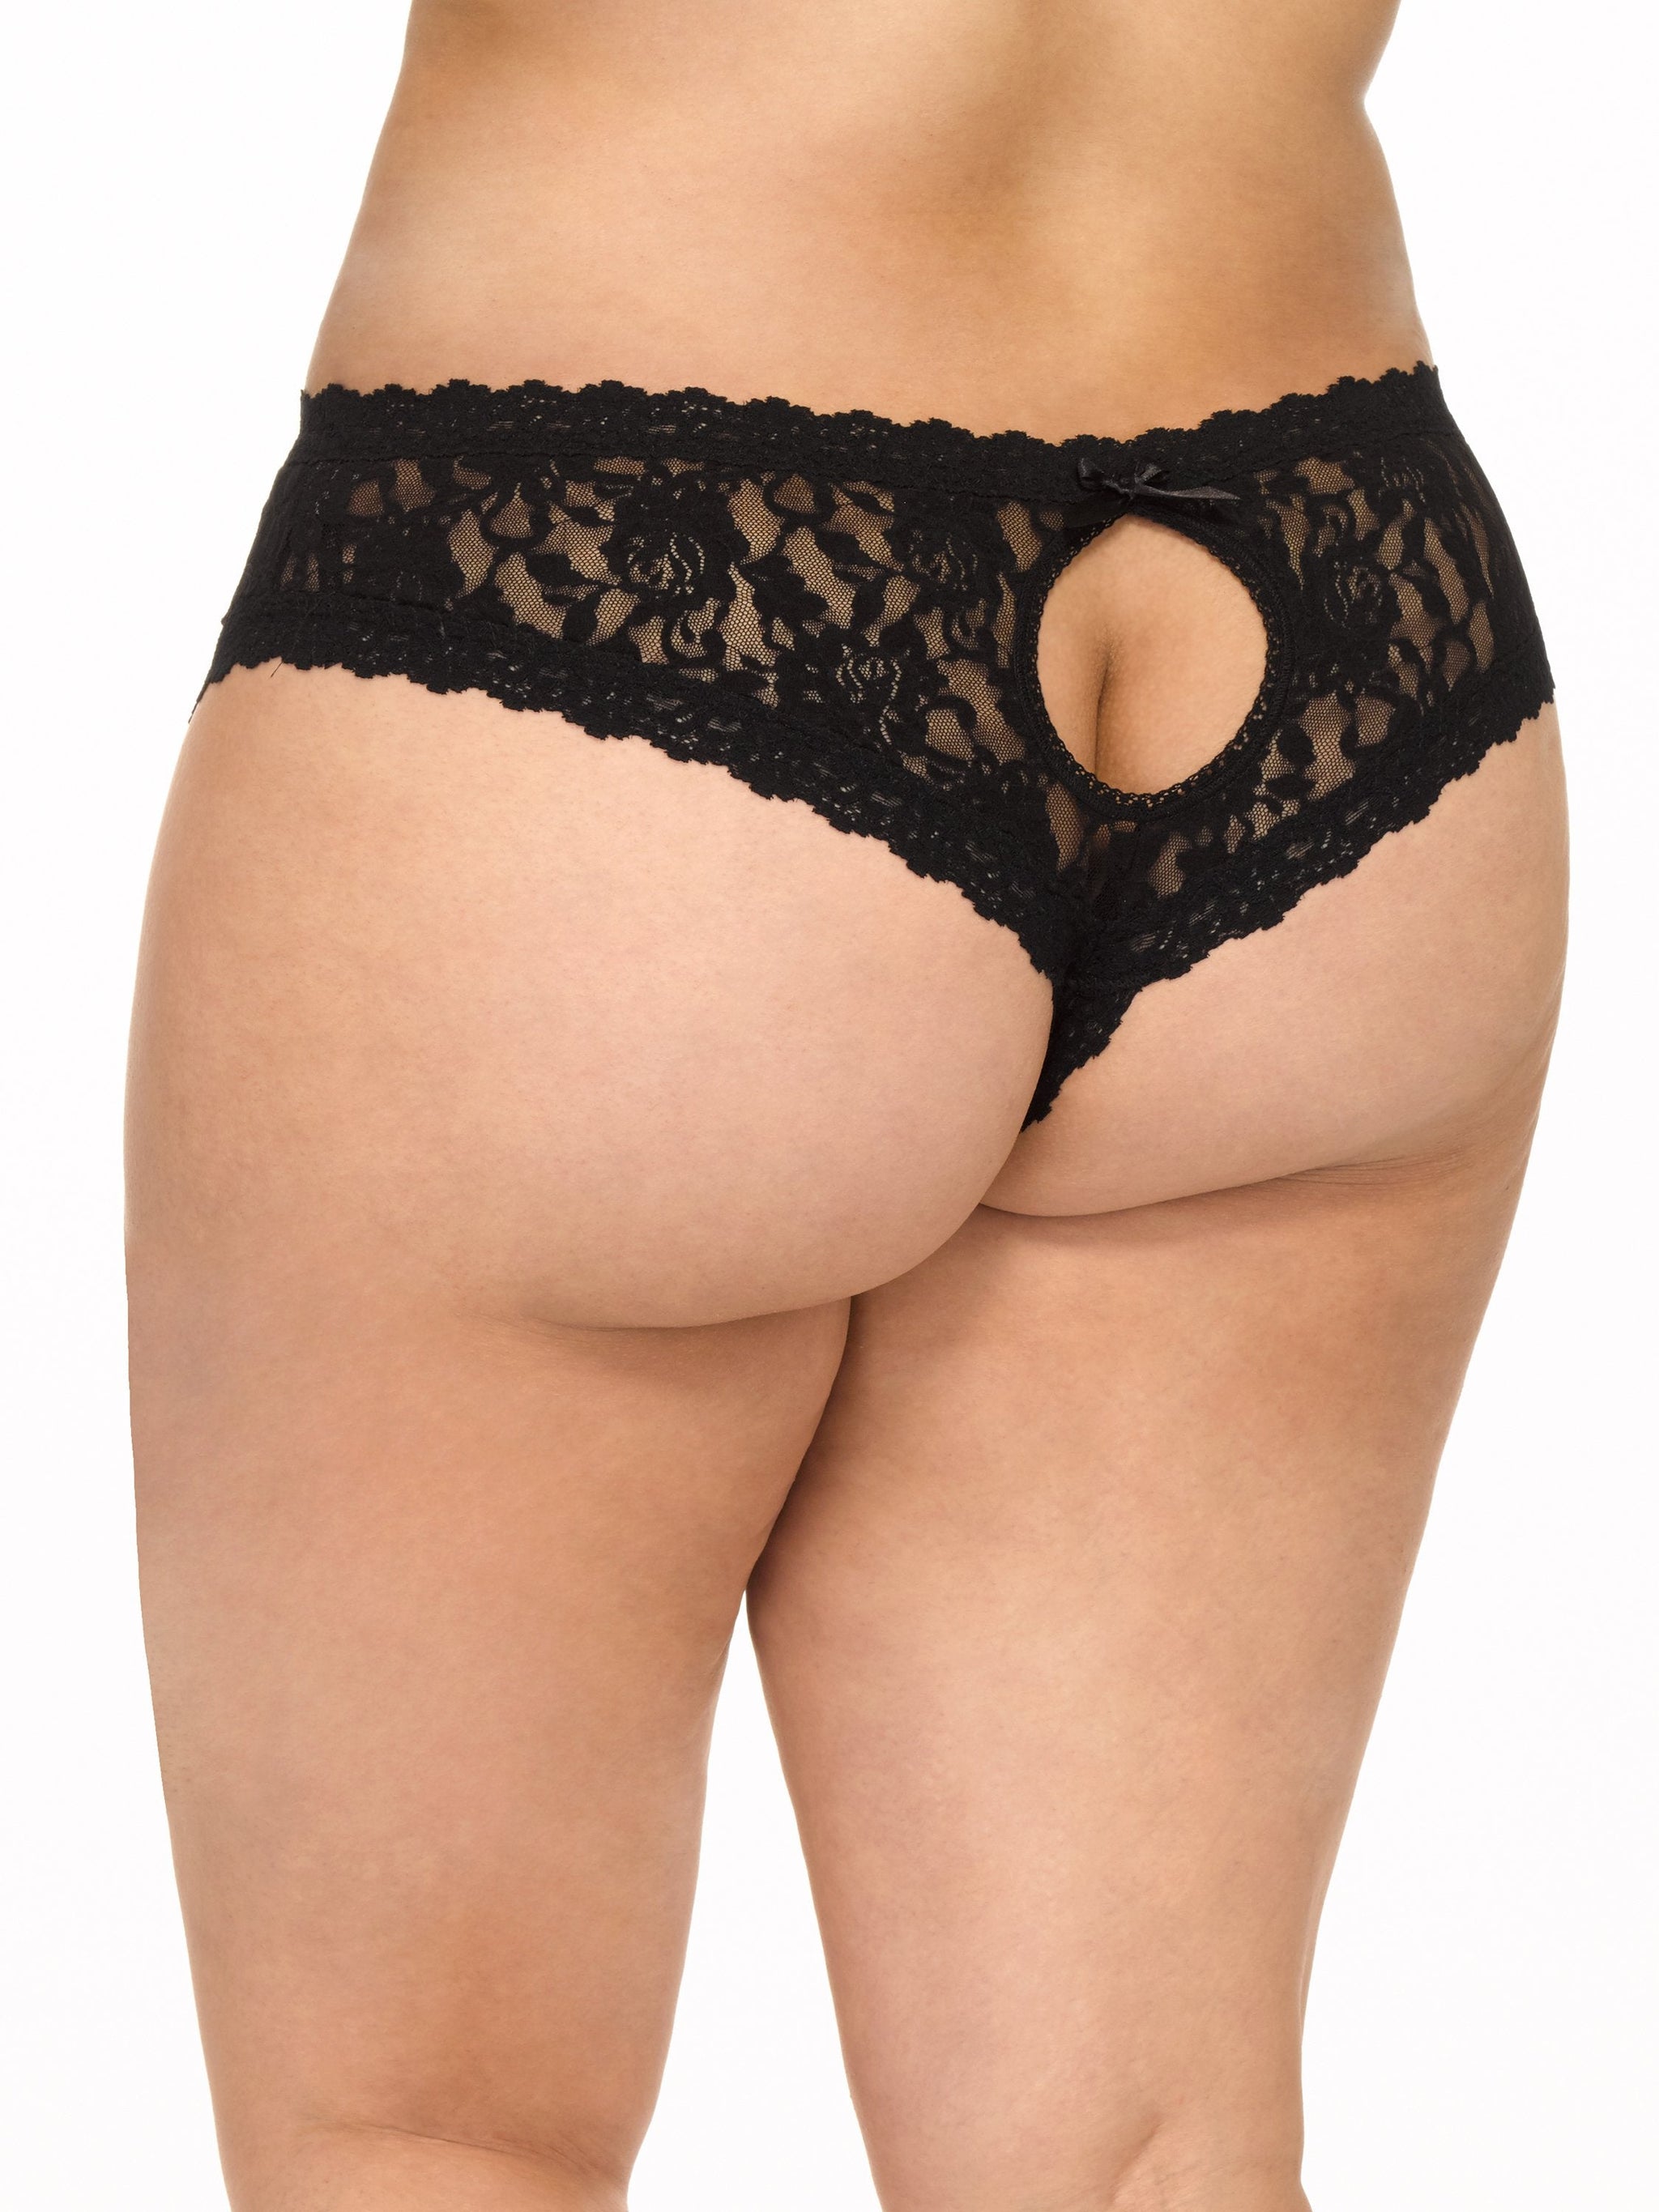 Buy Sexy Easy Access Open Crotch Open Back Thong Panties. Black